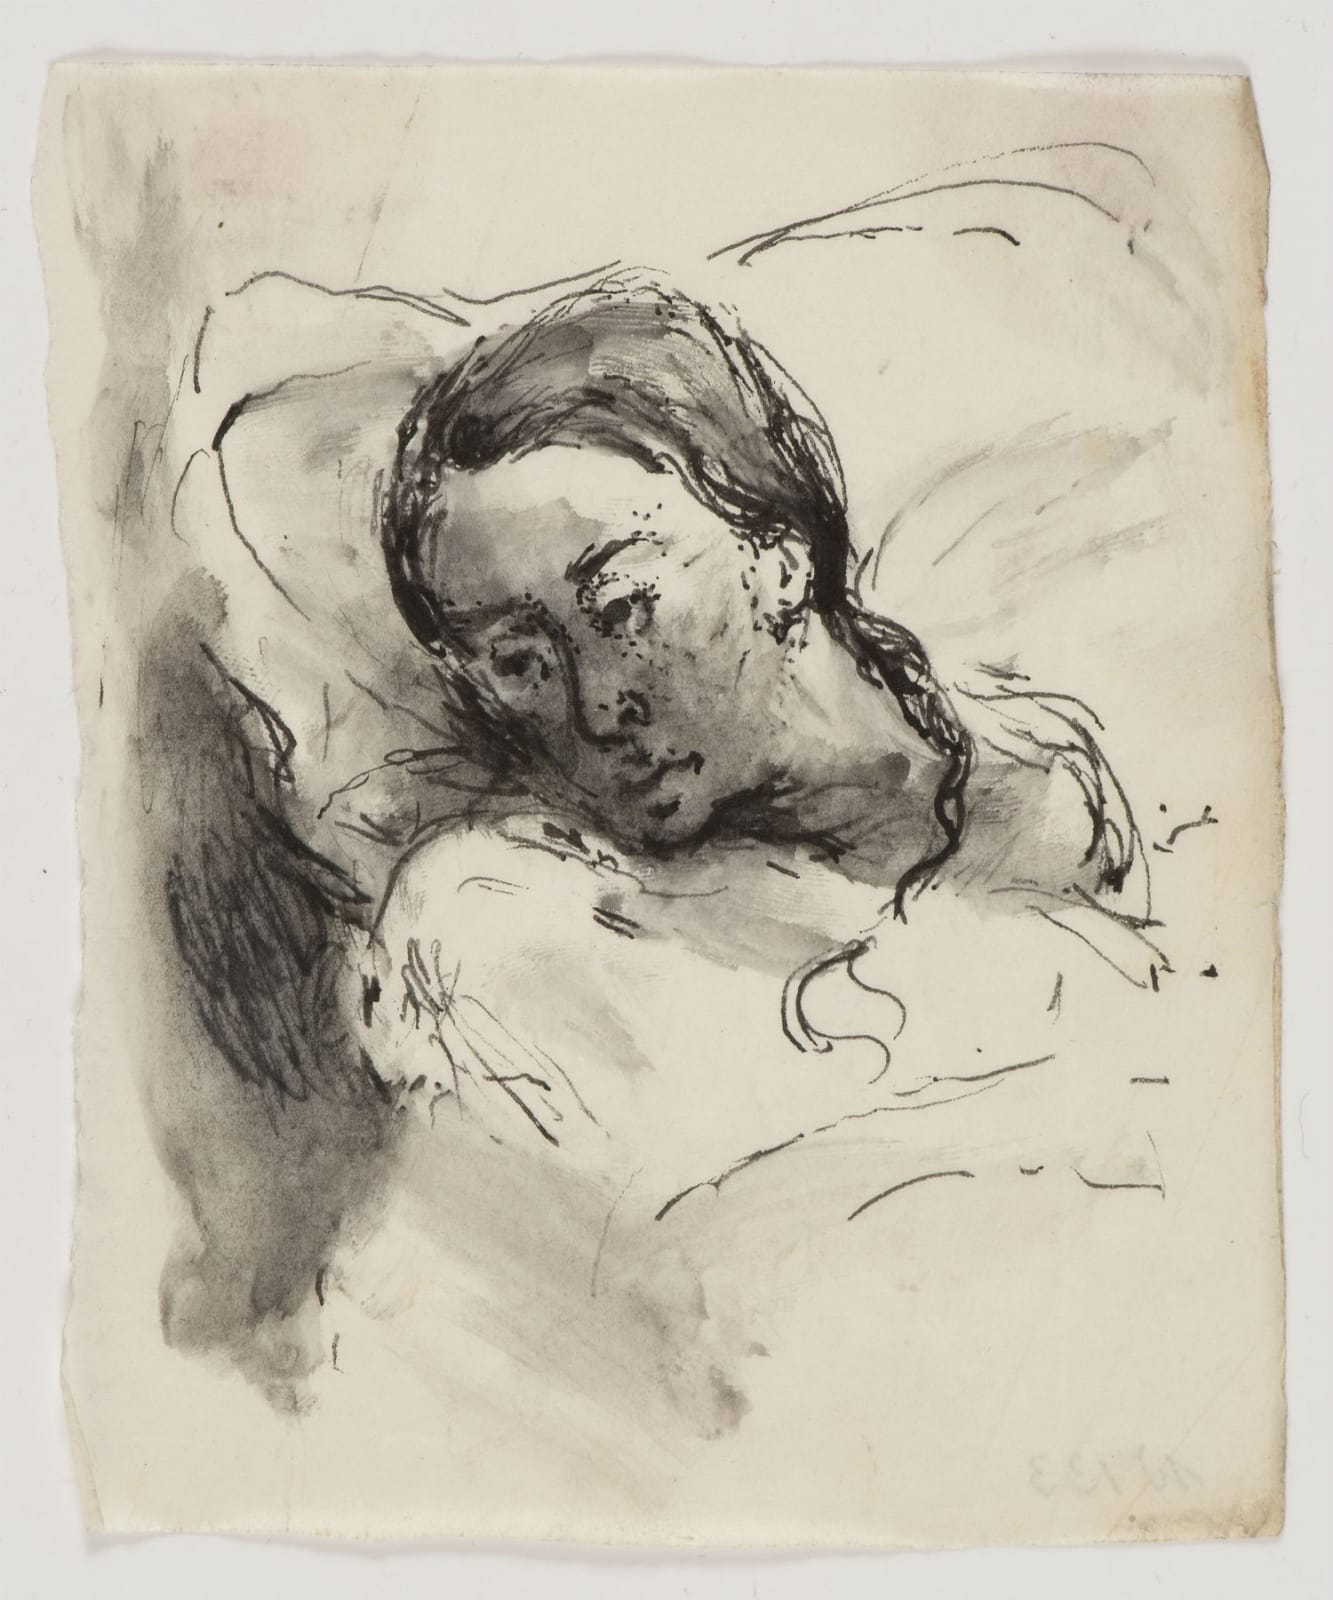 Eva Frankfurther (1930-1959) Woman in Hospital (Series of 8 Sketches from 'Whitechapel Diary') n.d. Pen and ink and wash and charcoal on paper 12 x 10 cm Private Collection To see and discover more about this artist click here